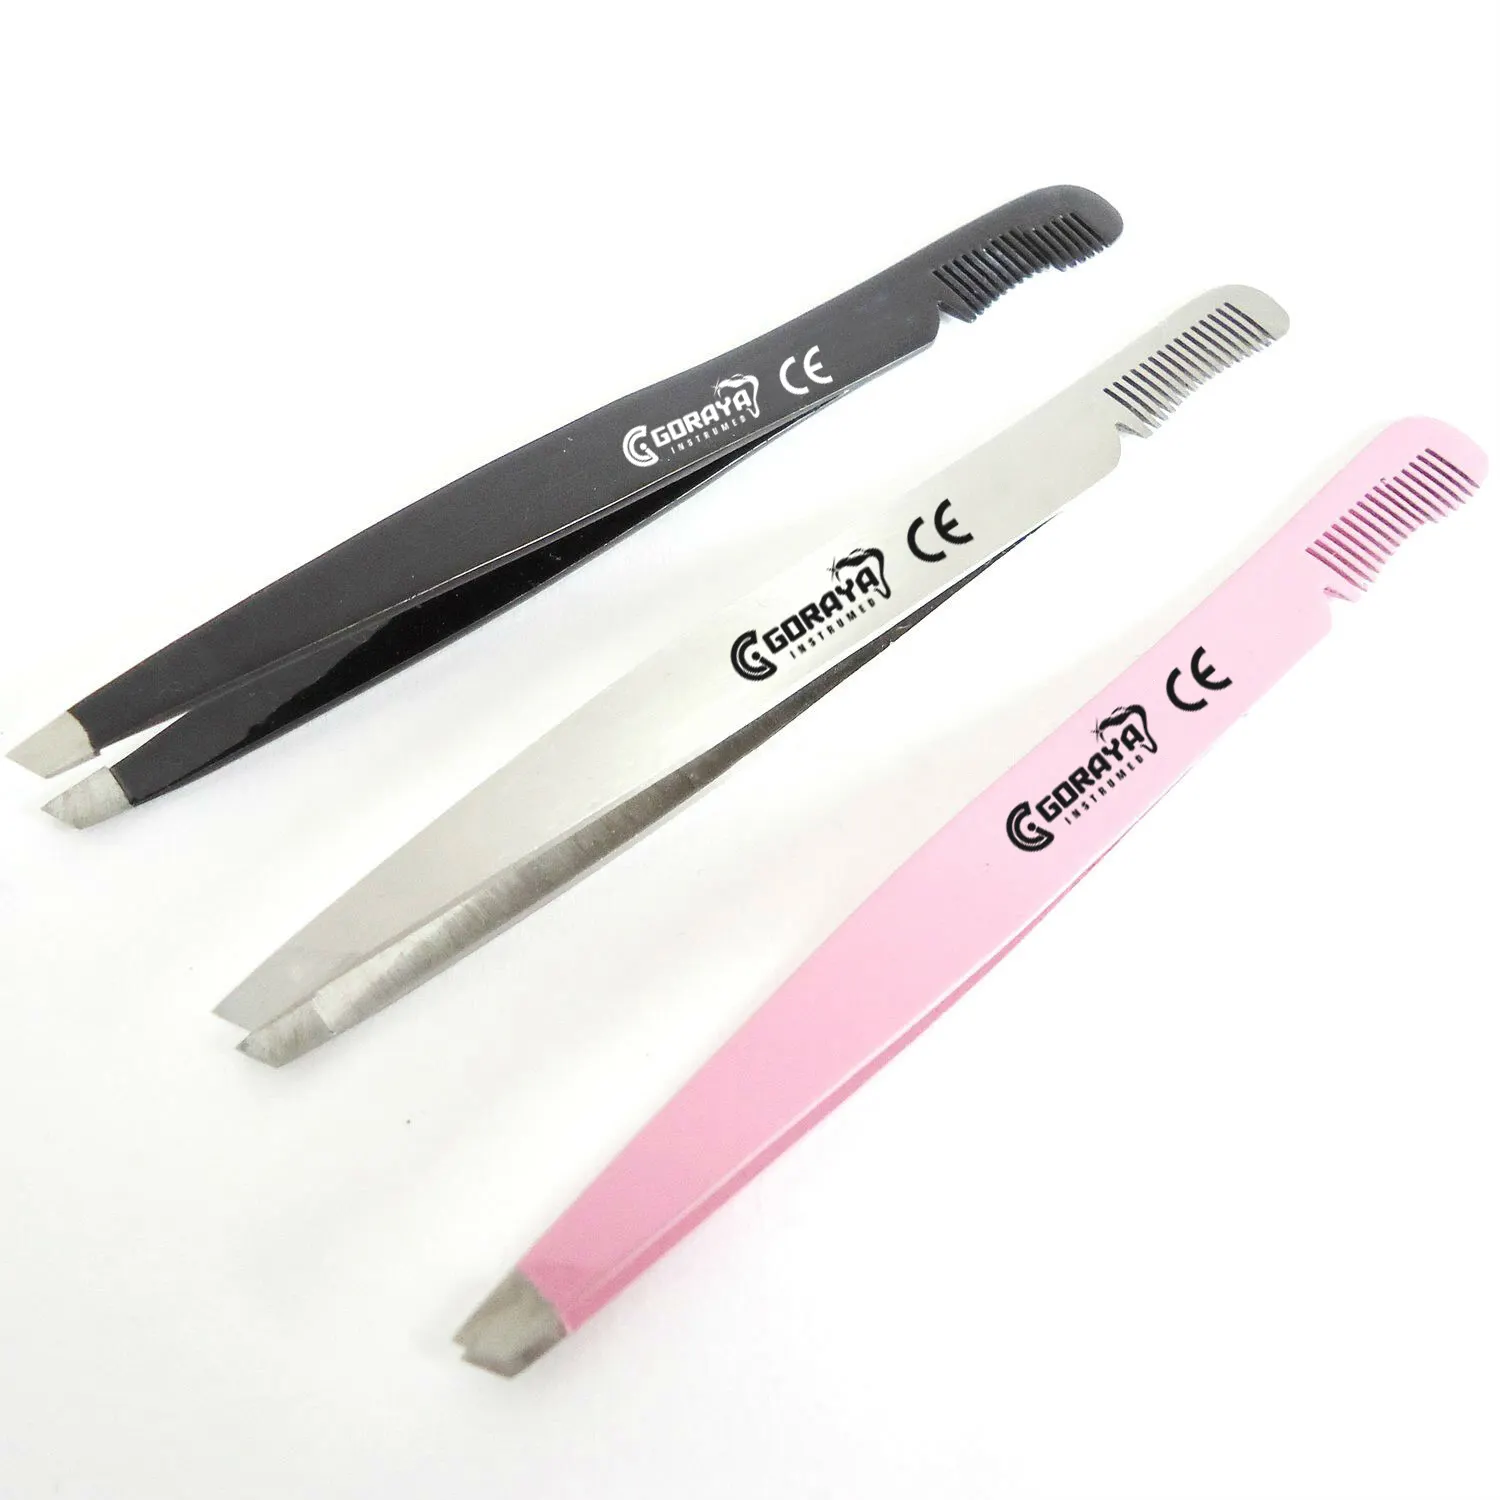 HOT SALE GORAYA GERMAN Eyebrow Tweezers Professional Comb Tip Quality Stainless Steel New CE ISO APPROVED